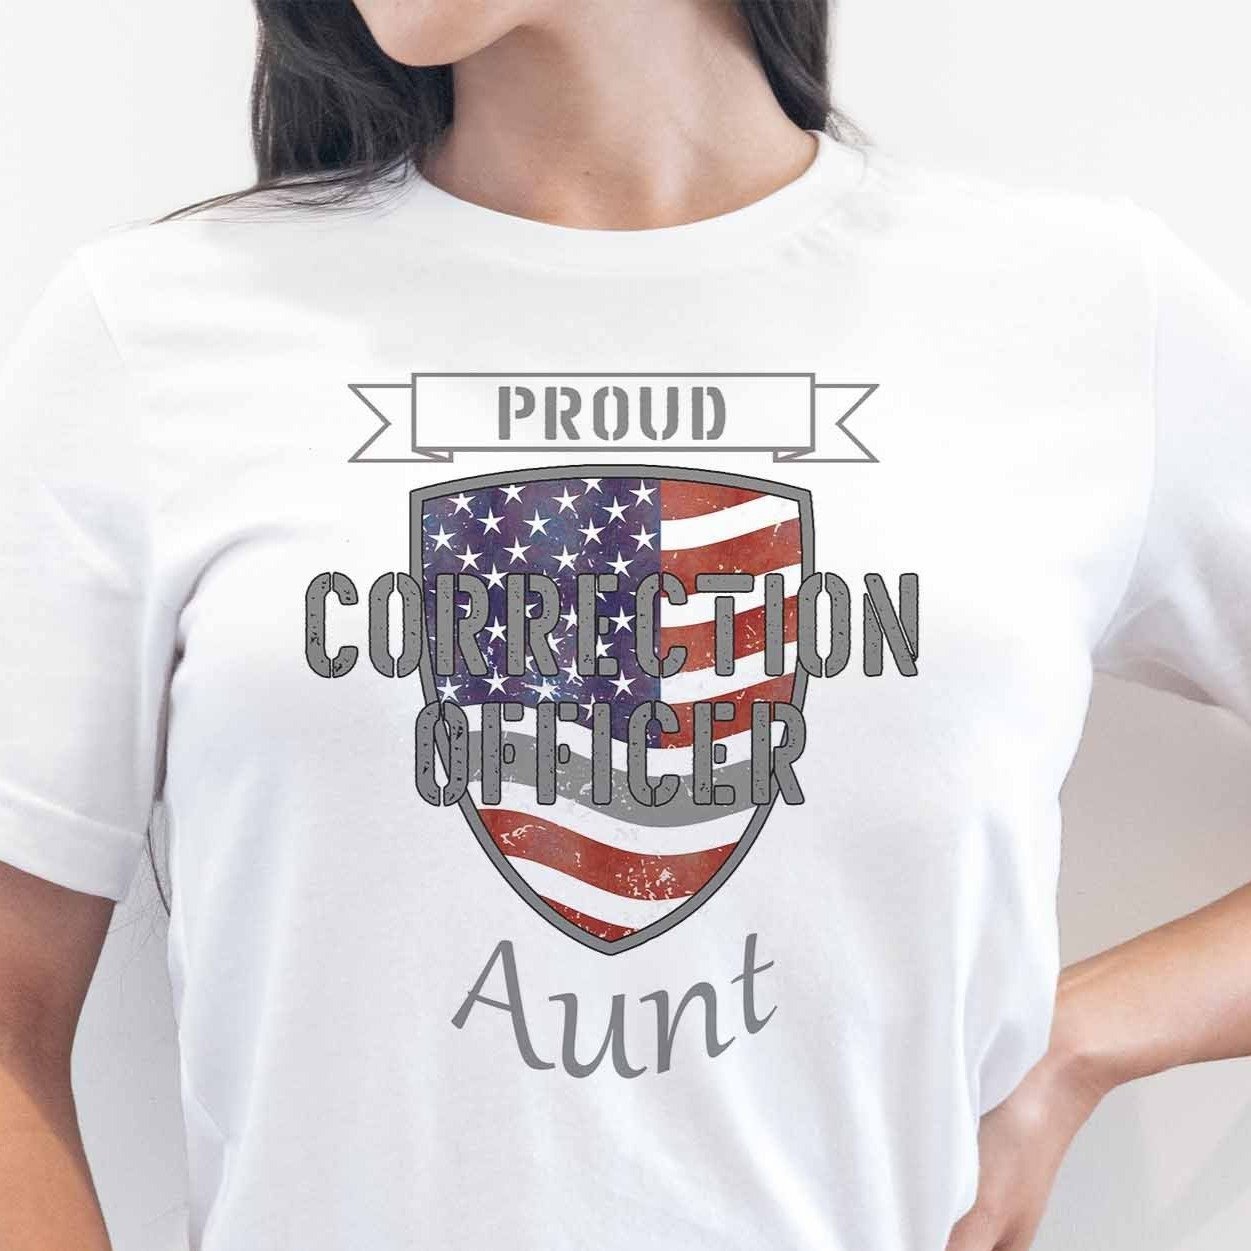 Proud Correction Officer Aunt - My Custom Tee Party